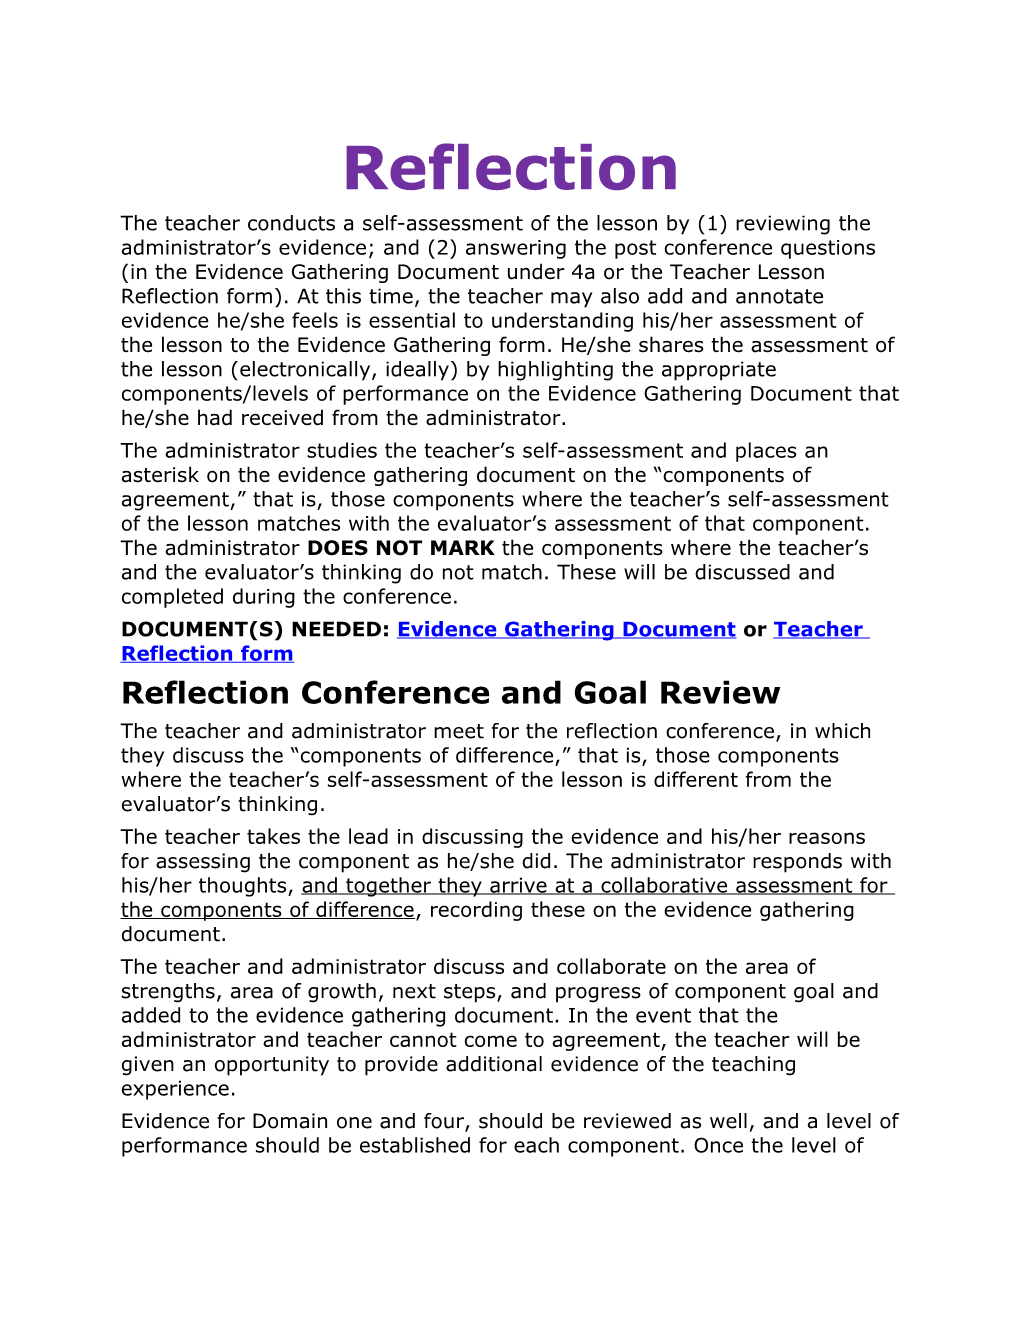 DOCUMENT(S) NEEDED: Evidence Gathering Document Or Teacher Reflection Form